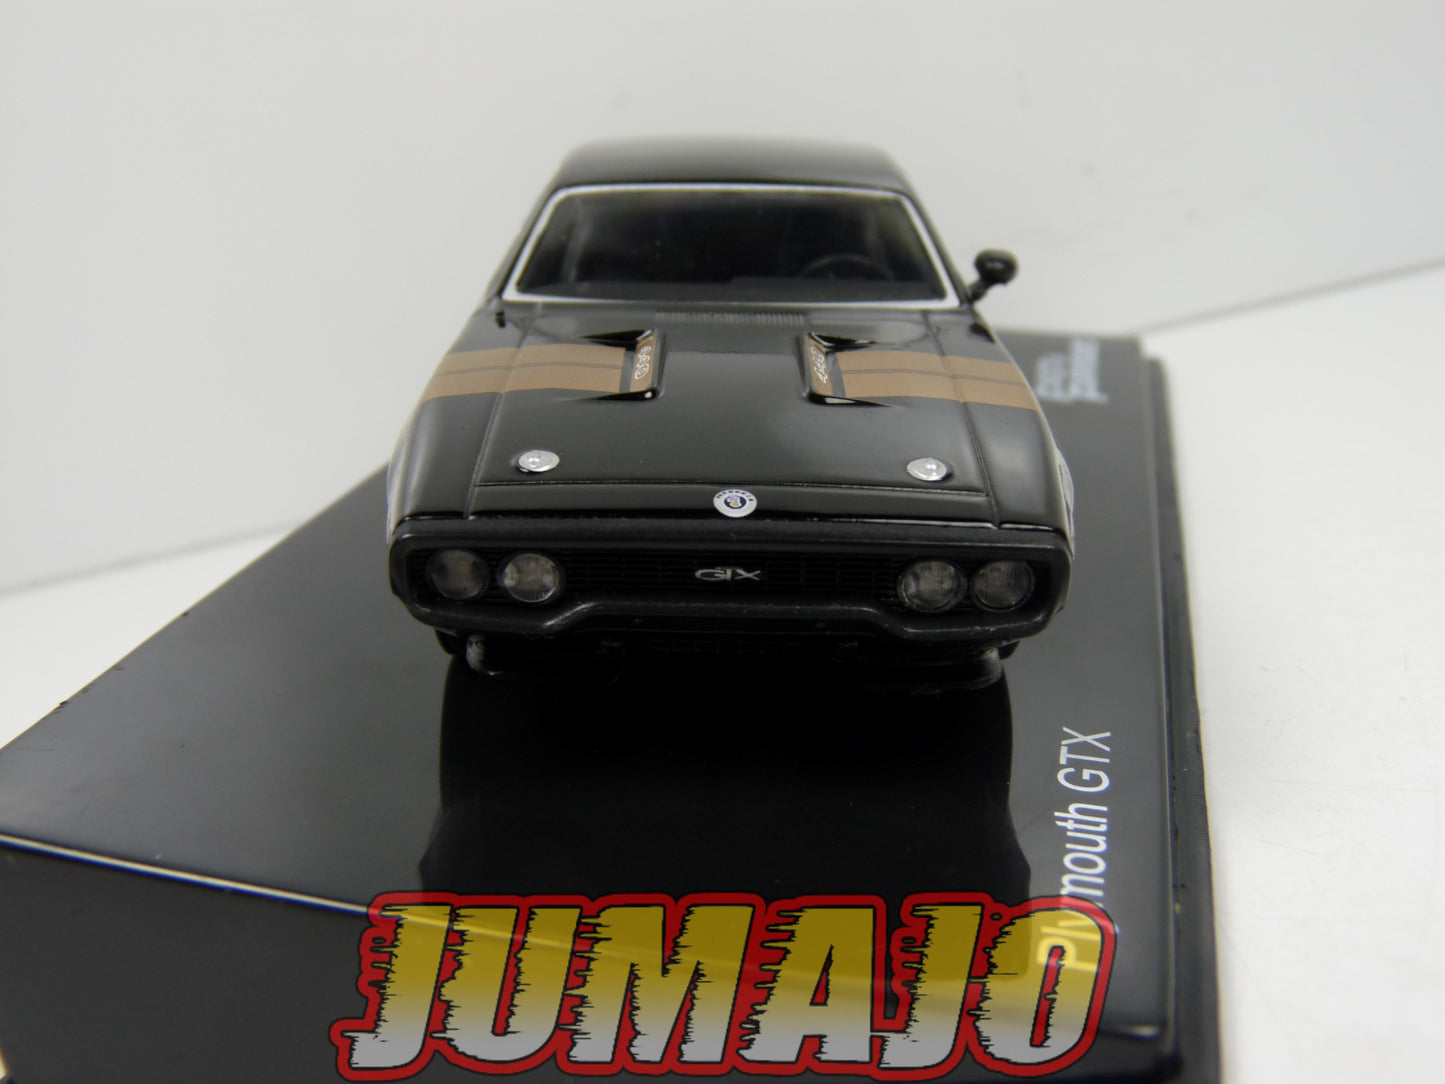 FF16 Voiture 1/43 IXO altaya Fast and Furious : Plymouth GTX